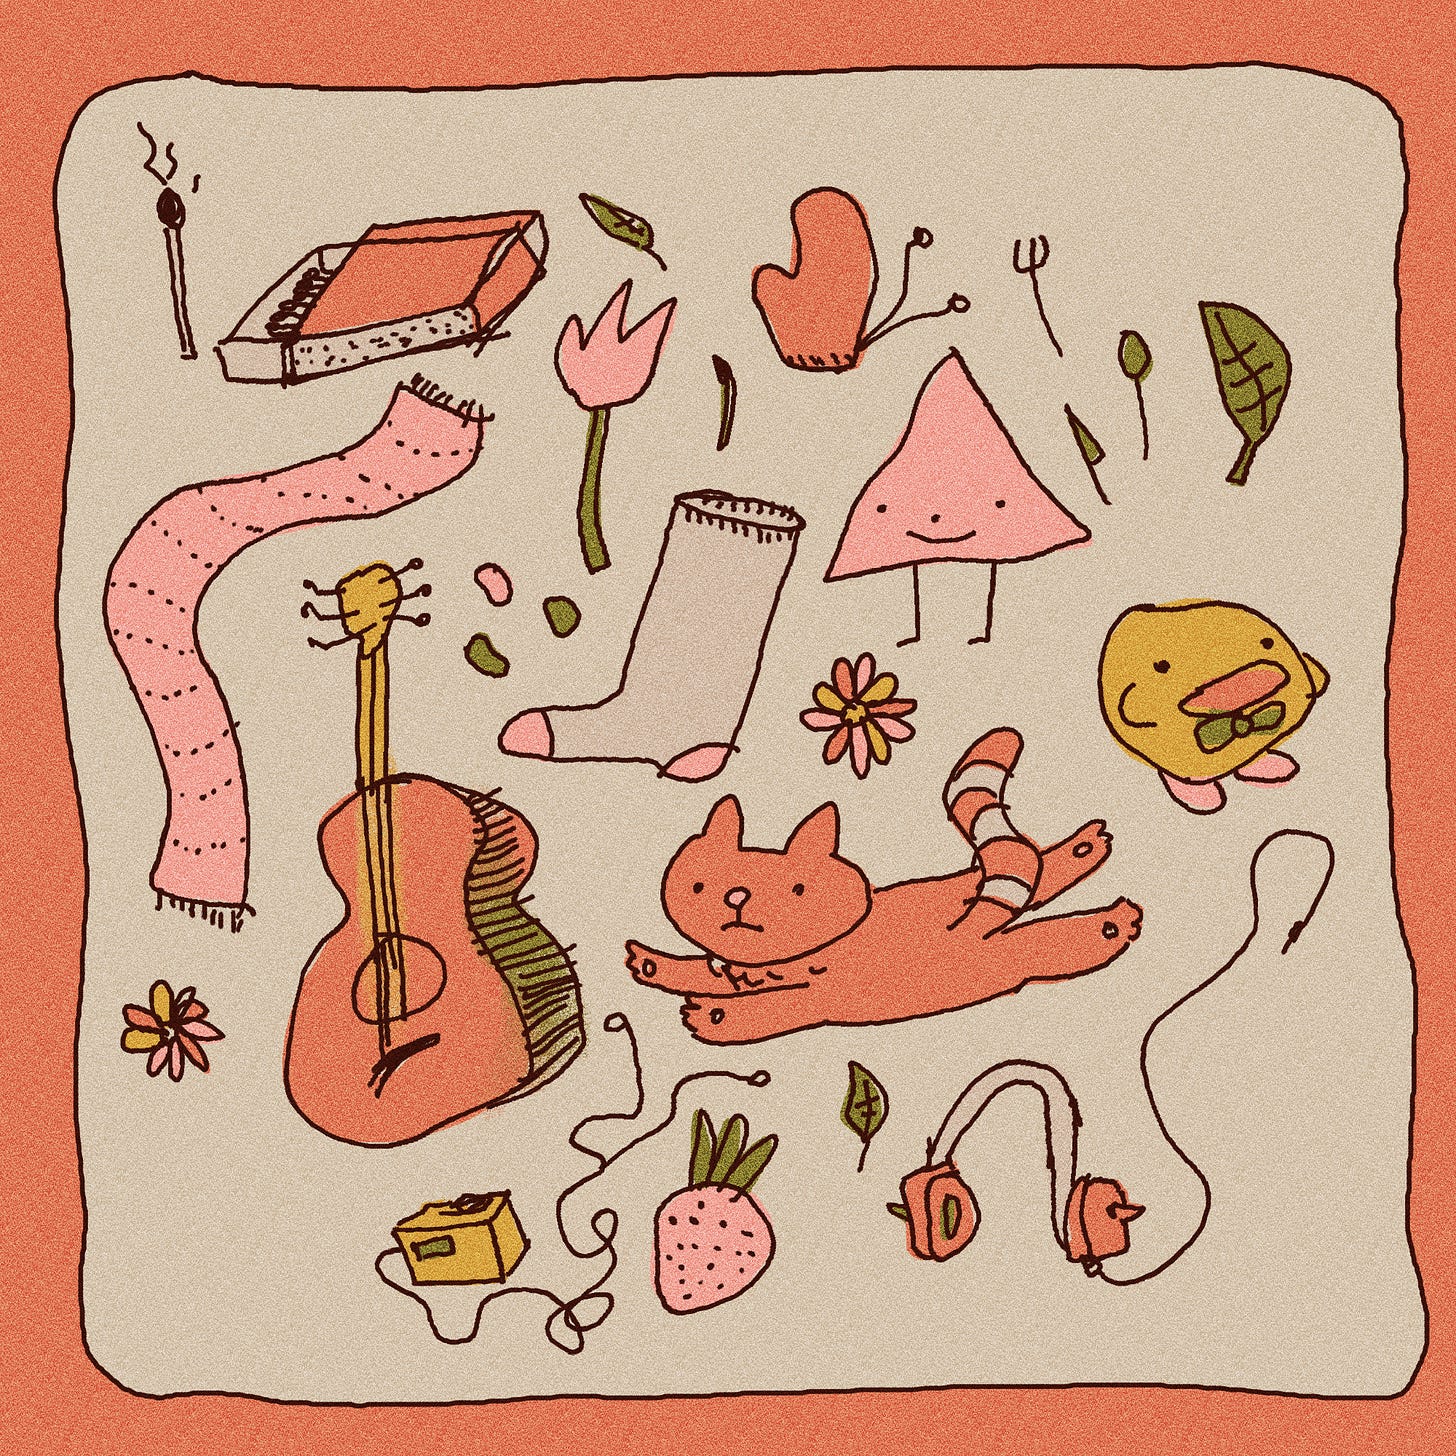 a drawing with fall colours of some characters from noodledesk, including a cat, the triangle, a duck with a bow tie, and other items